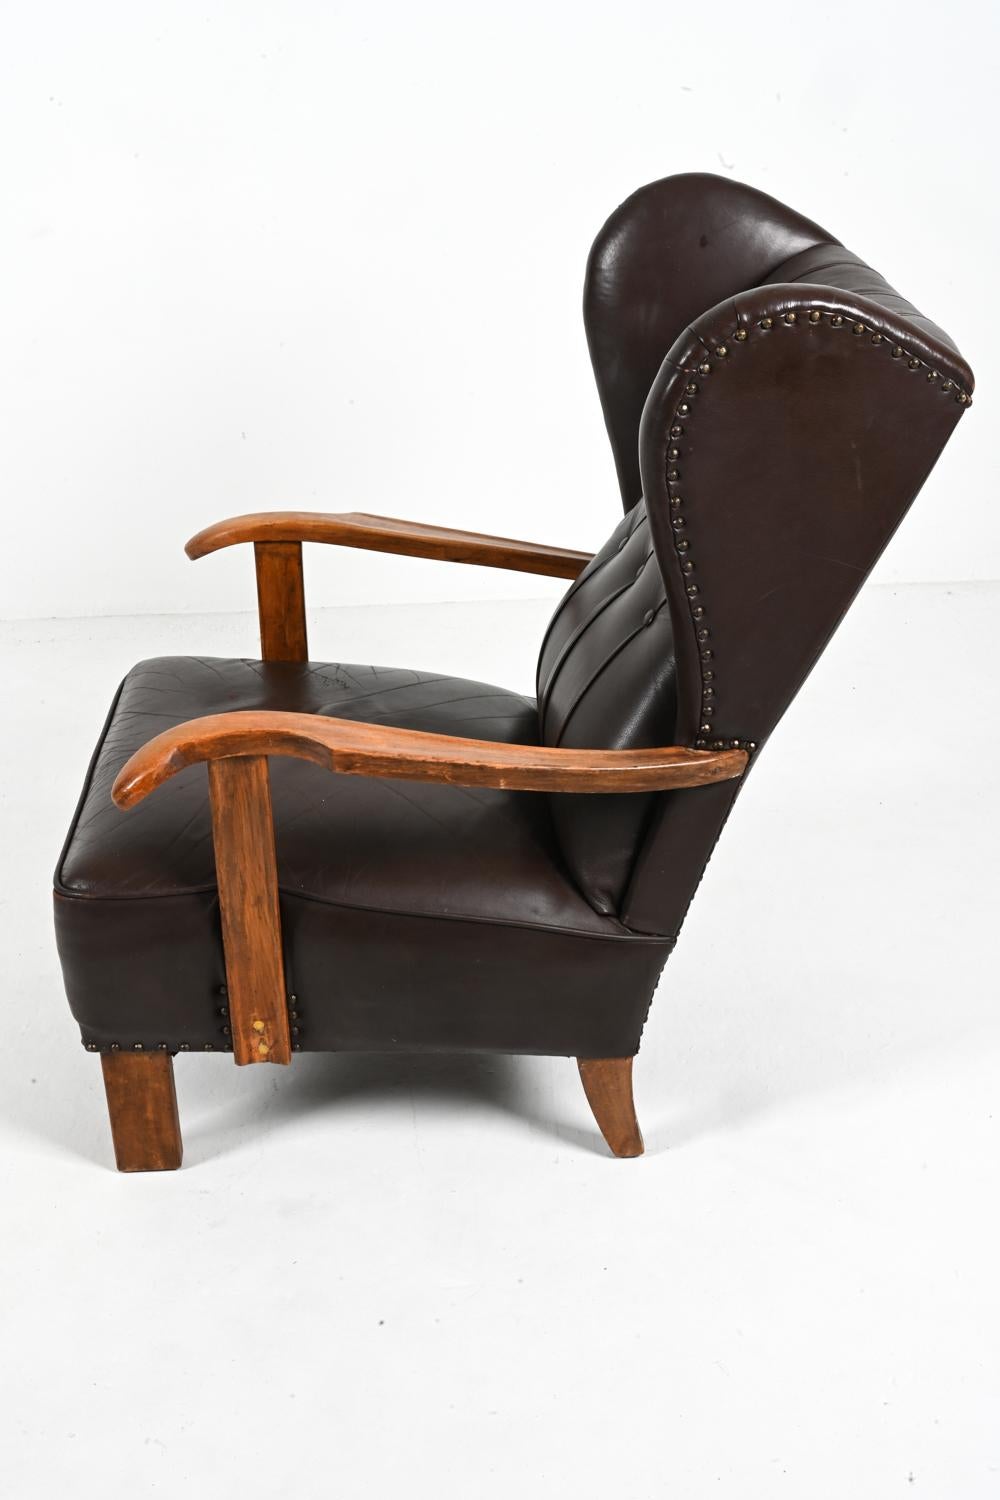 Fritz Hansen Model 1582 Wingback Lounge Chair in Beech & Leather, c. 1940's For Sale 3